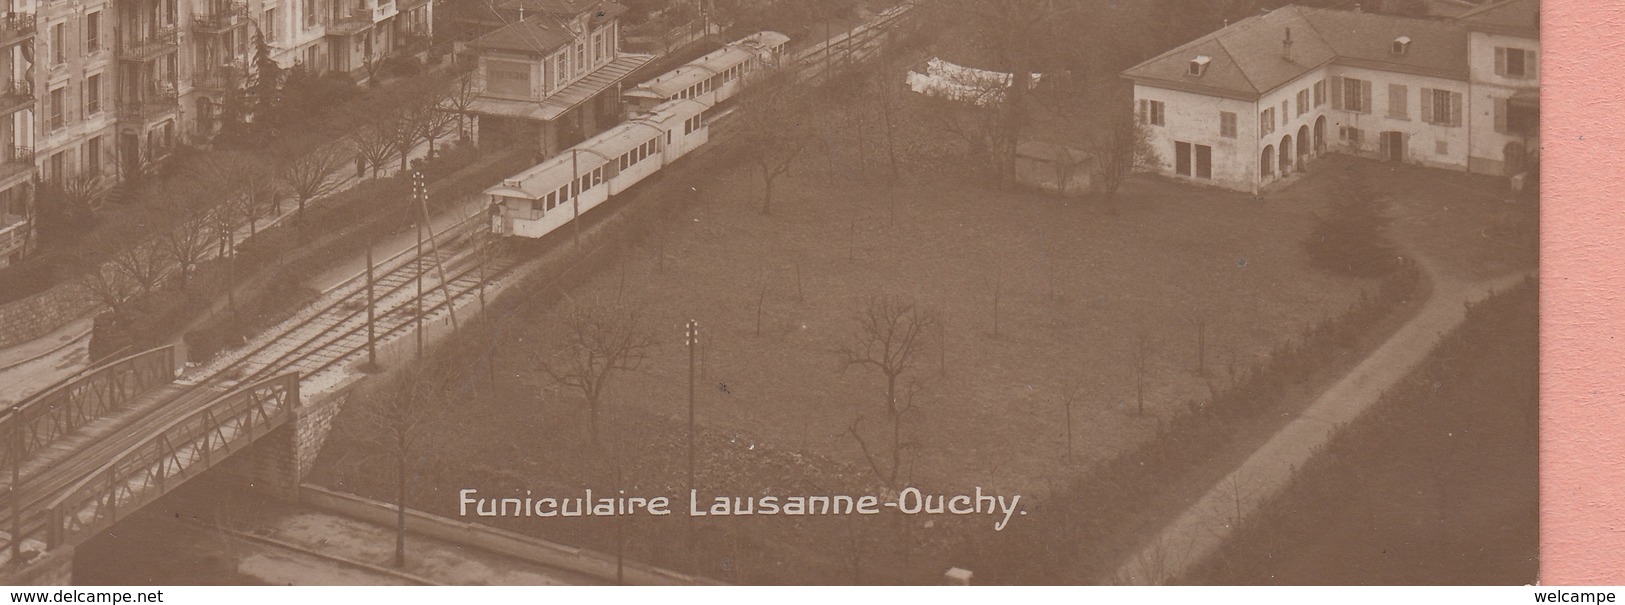 OUDE POSTKAART ZWITSERLAND - SCHWEIZ - SUISSE -  FUNICULAIRE LAUSANNE - OUCHY - Lausanne